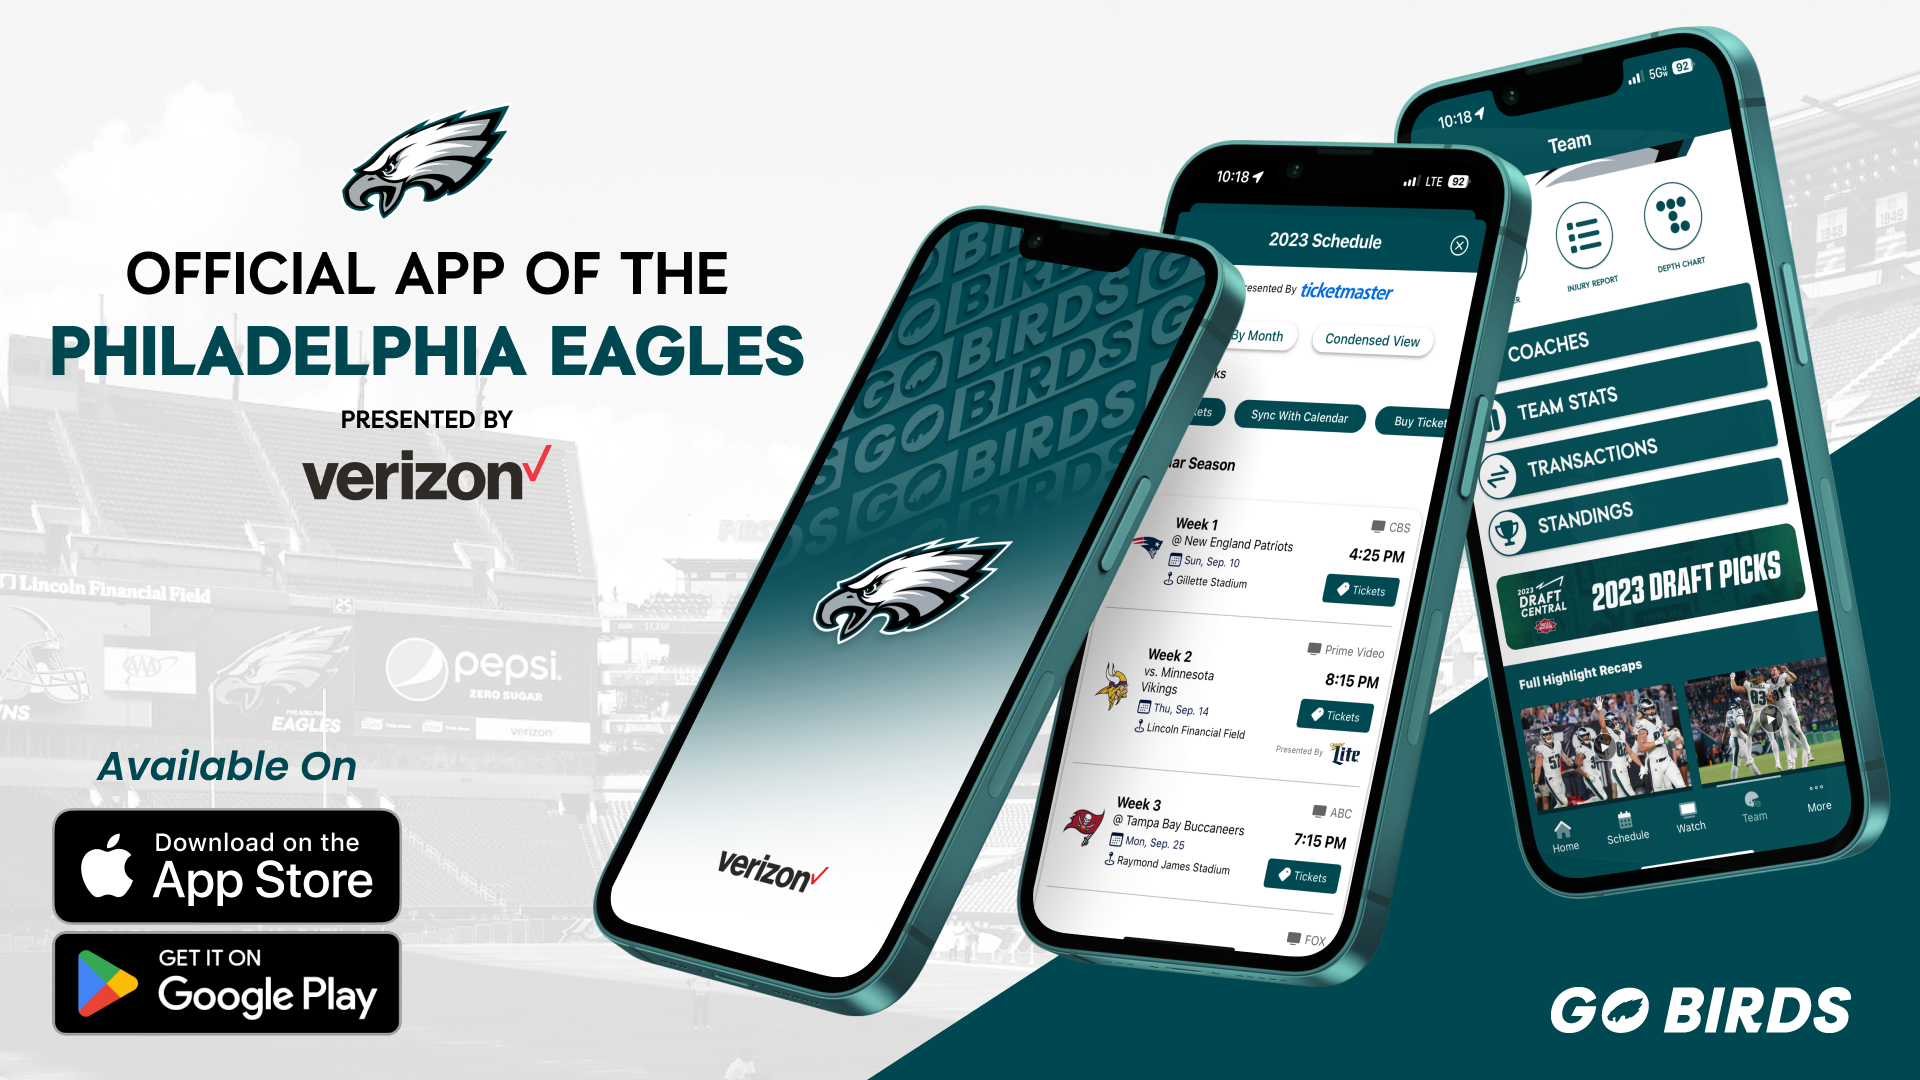 Jefferson Outpatient Imaging - Bra 2: Fly Eagles Fly Calling all football  fans, this bra includes FOUR (4) tickets to the Philadelphia Eagles vs. New  Orleans Saints game on Sunday, November 21st